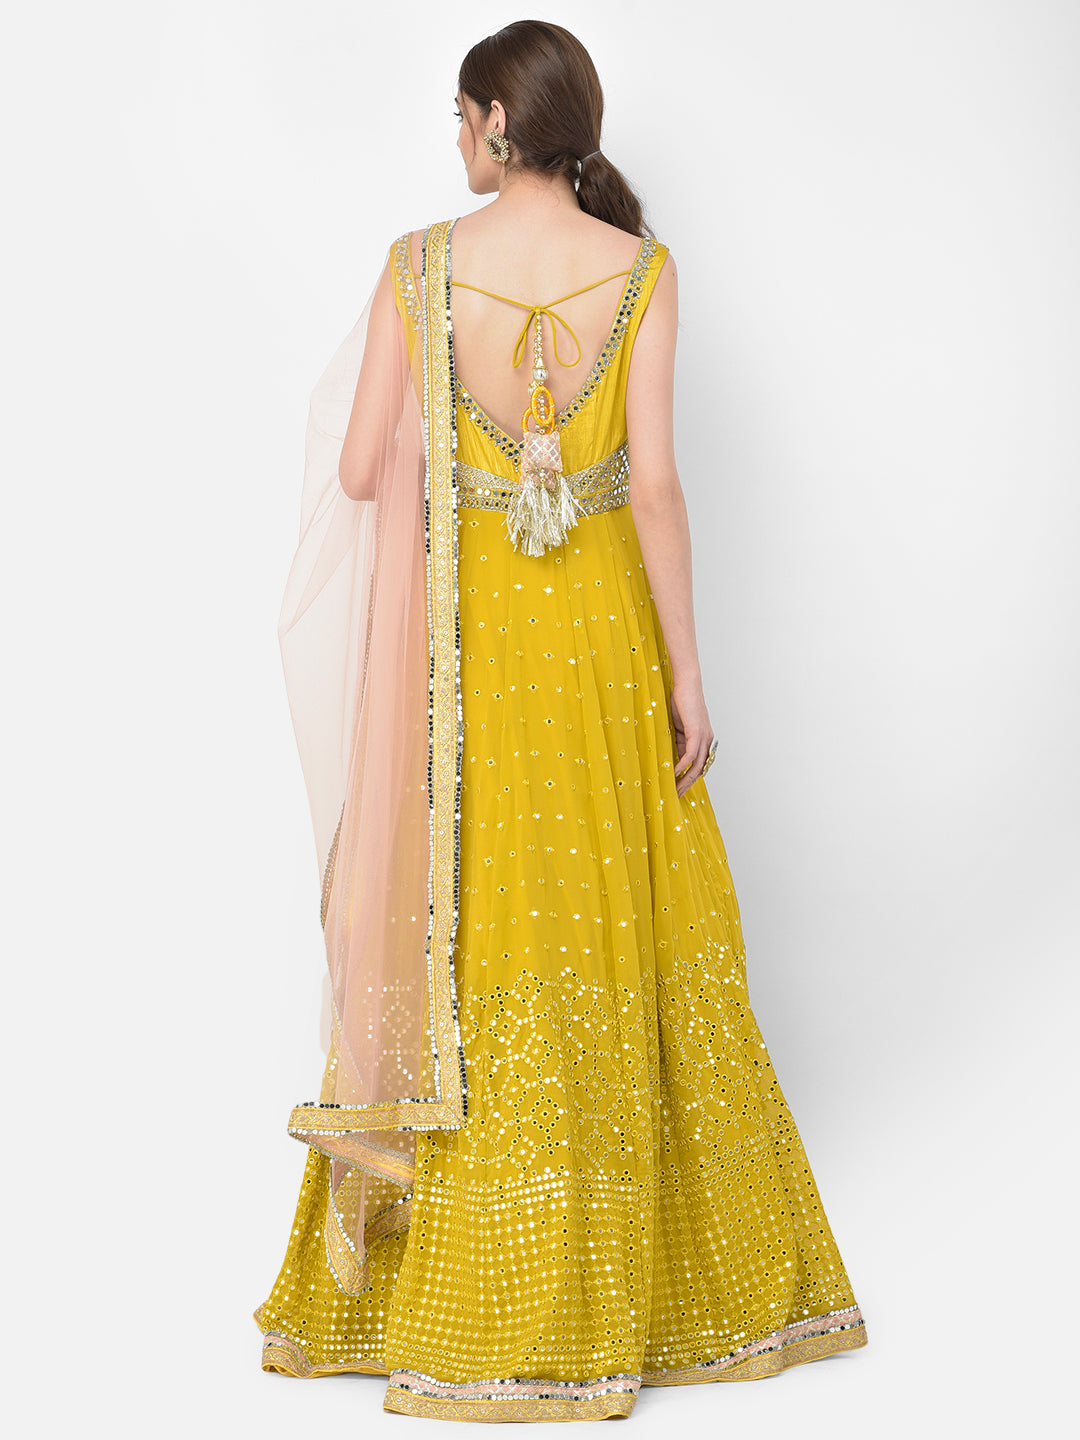 Neerus India - The sale cannot get better than this! Get amazing deals  exclusively on our website! 🛒 Make the most of our #ShopFromHome sale and  stock up on those ethnic wear